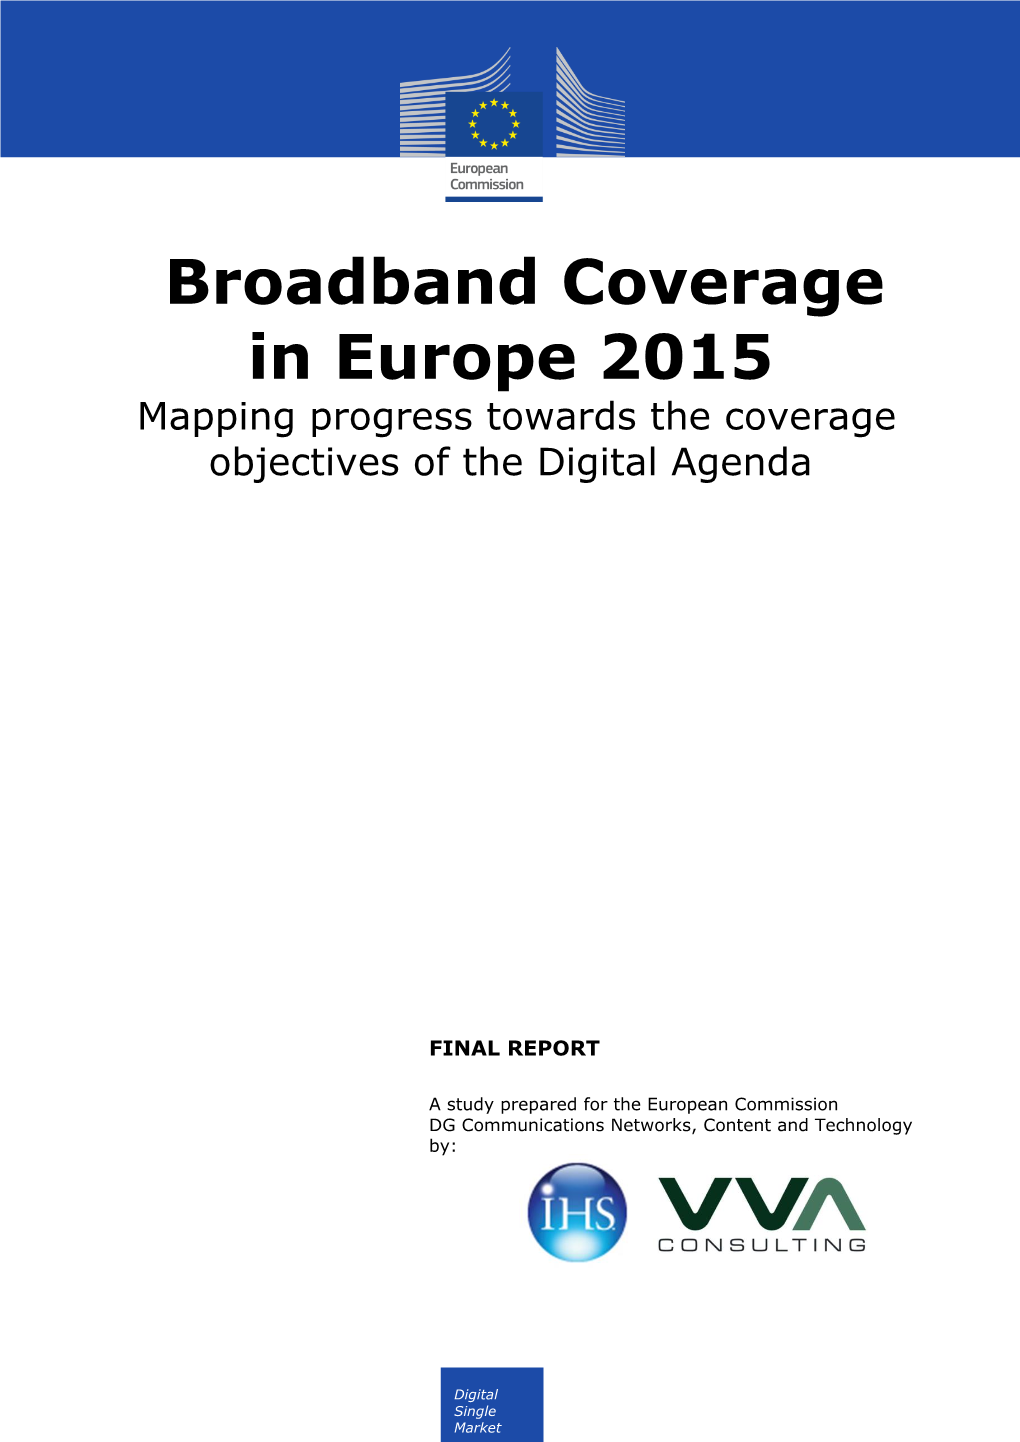 Broadband Coverage in Europe 2015 Mapping Progress Towards the Coverage Objectives of the Digital Agenda